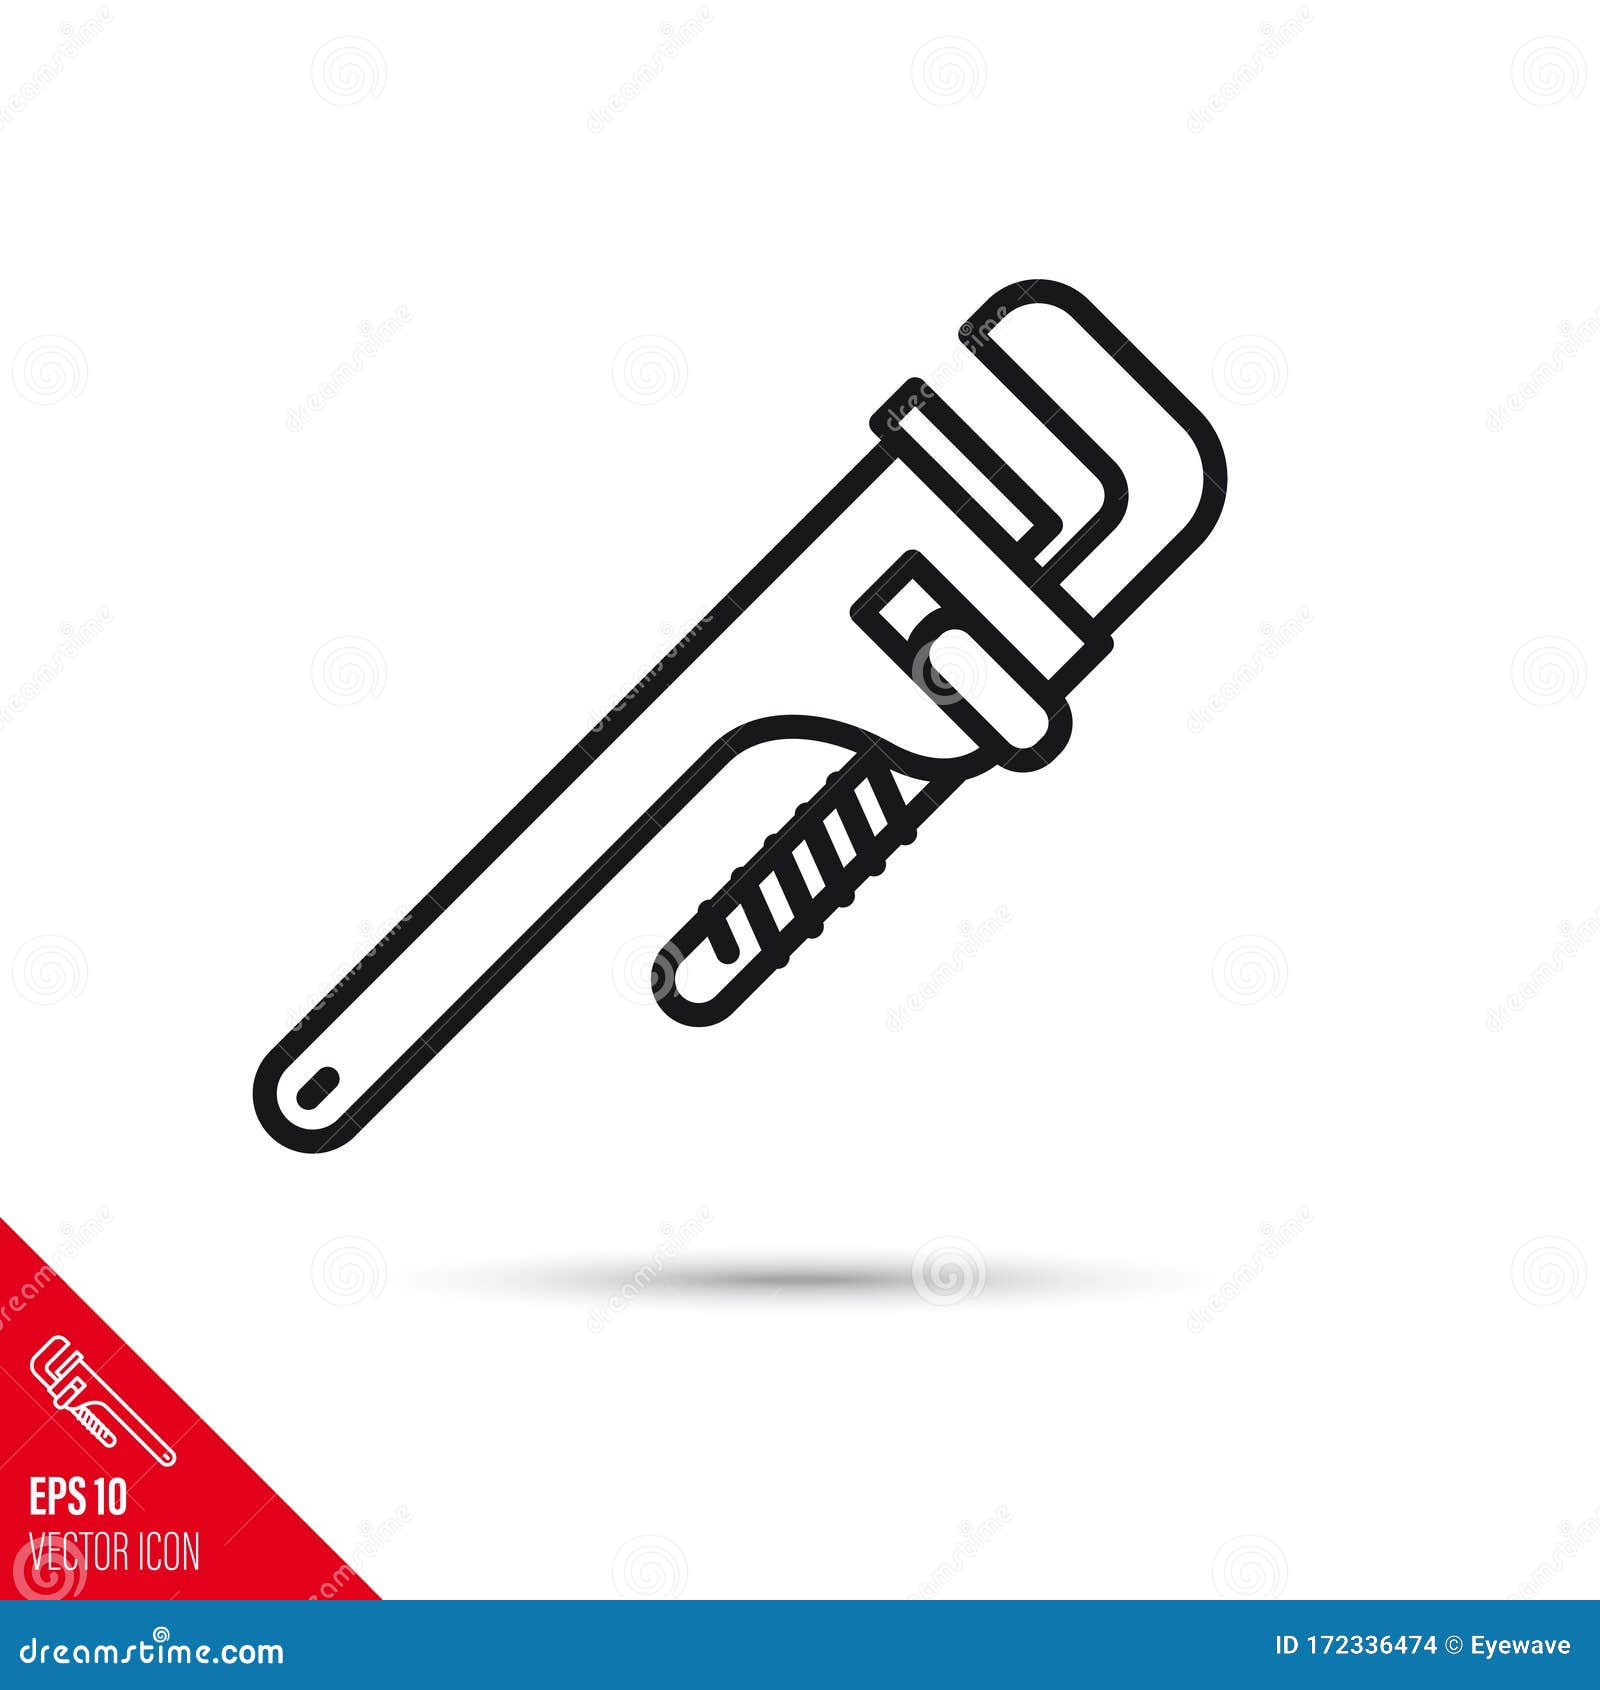 Pipe Wrench Vector Line Icon Stock Vector - Illustration of outline